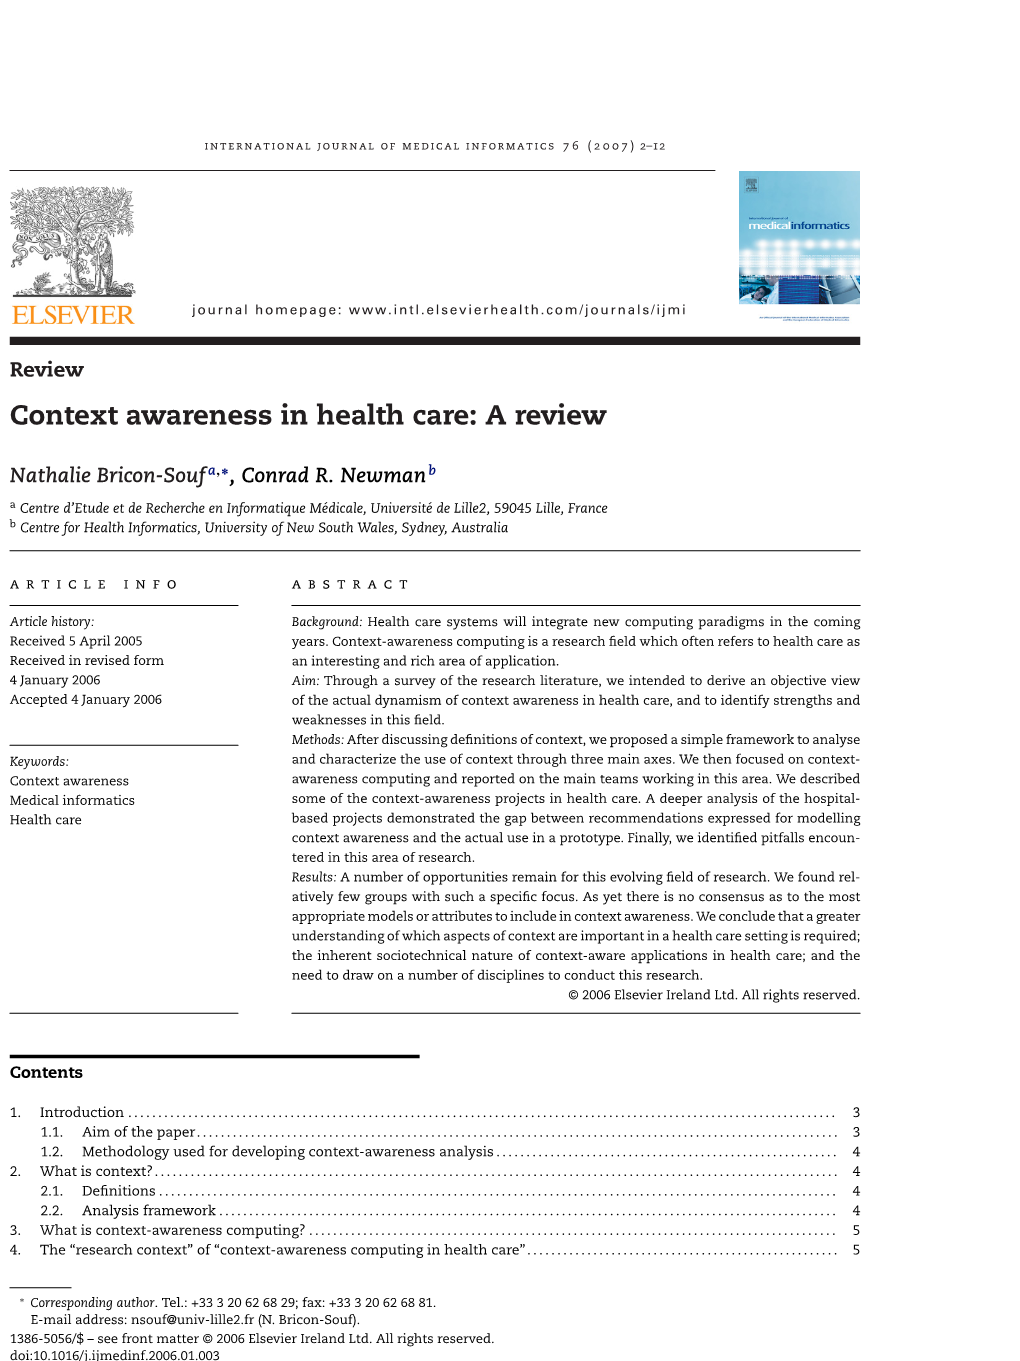 Context Awareness in Health Care: a Review